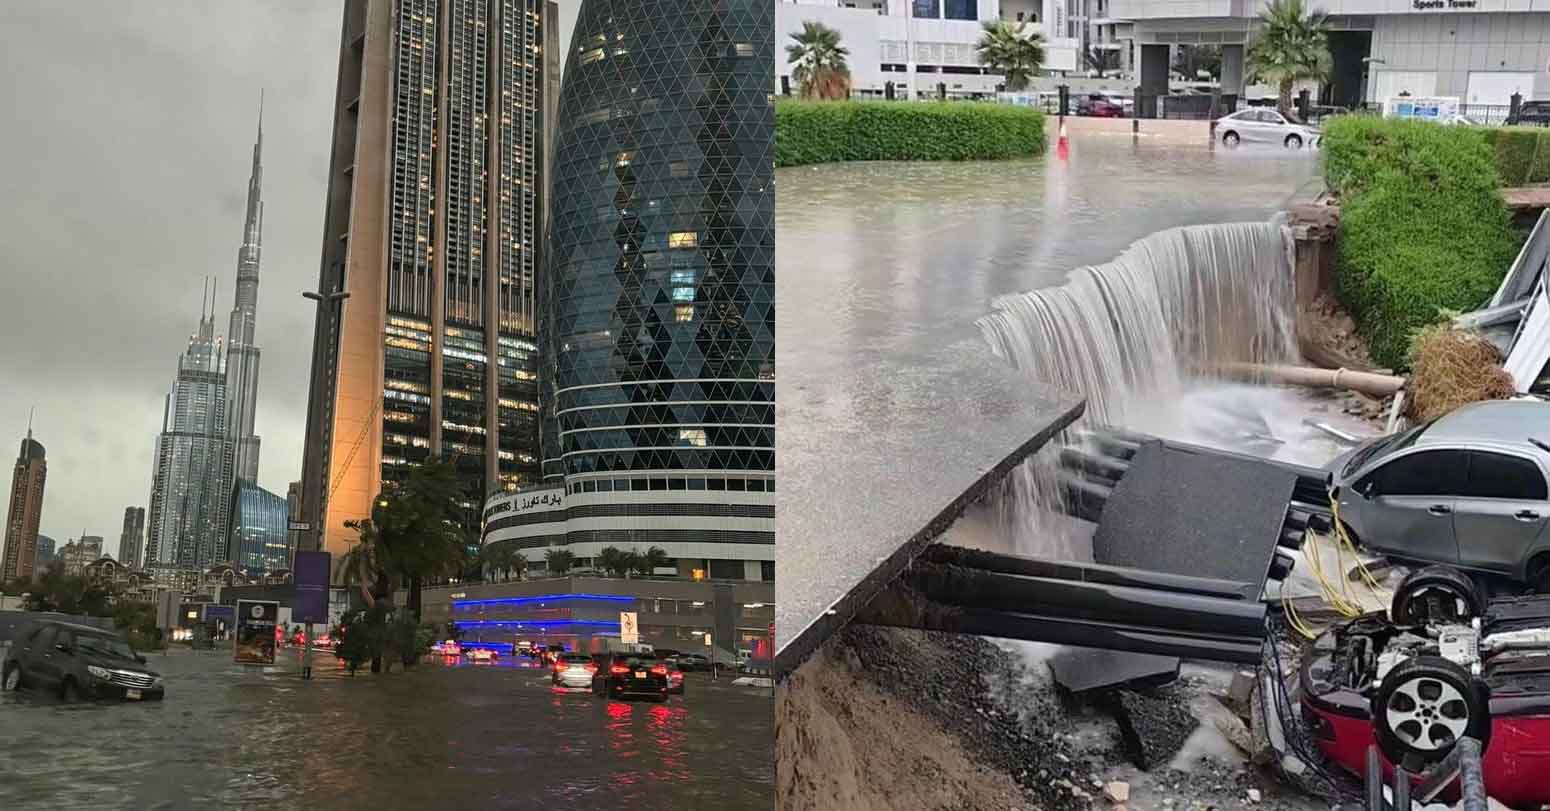 Storm Dumped Heaviest Rain Ever Recorded In Desert Nation Of UAE, Flooding Roads And Dubai’s Airport